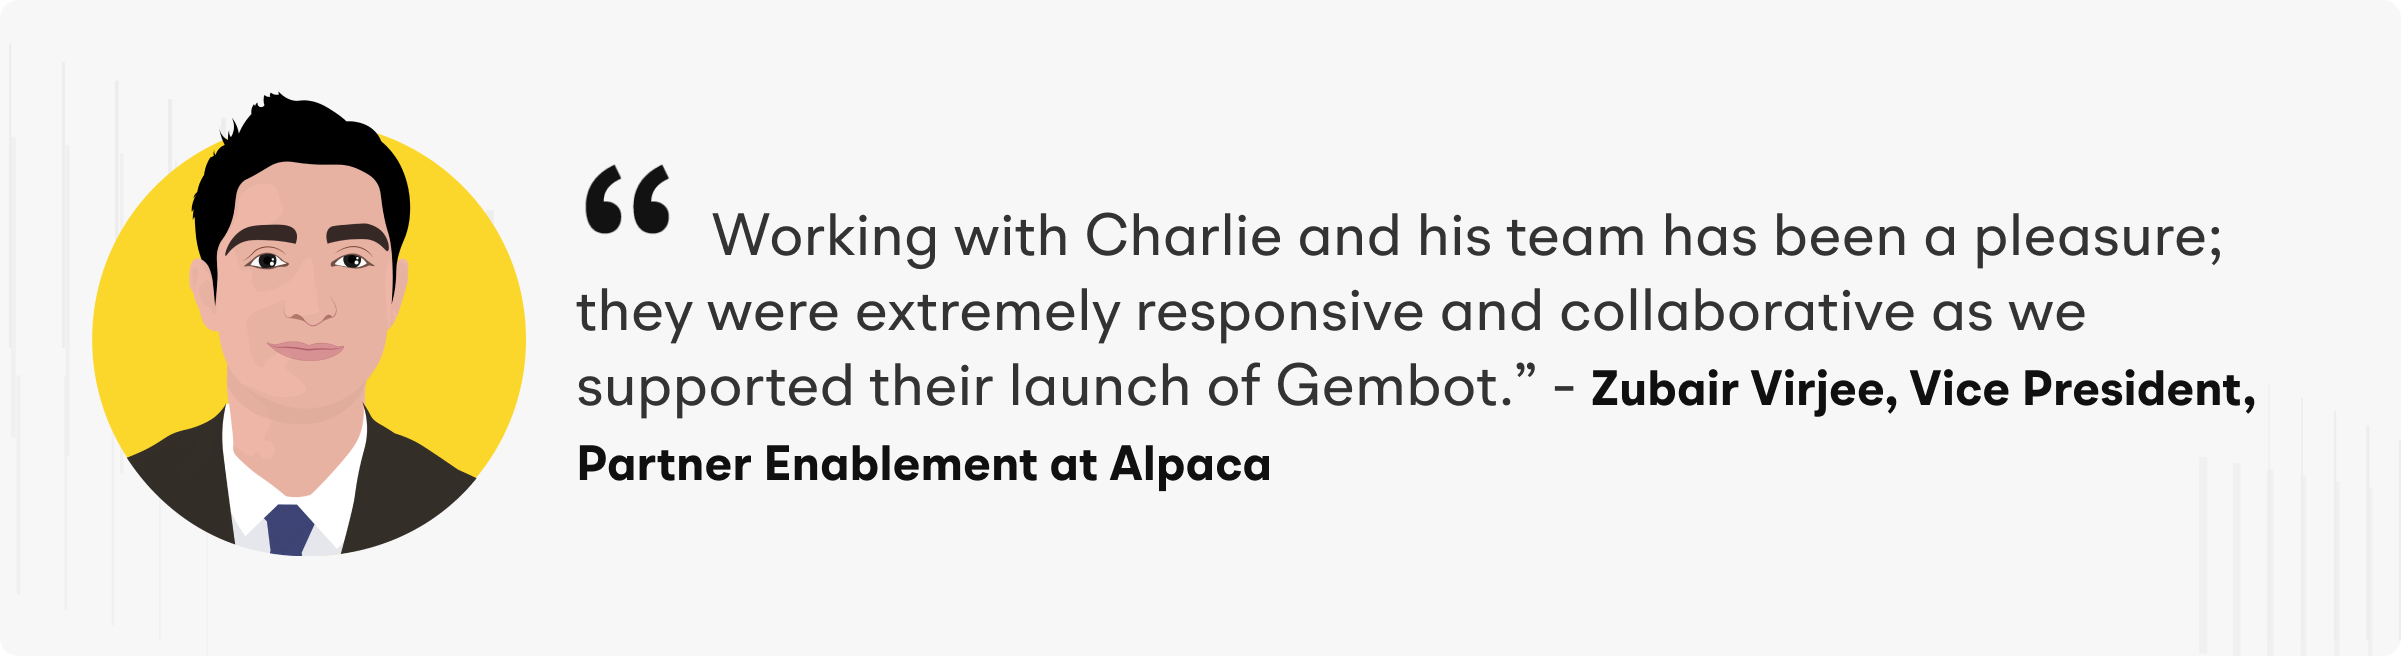 “Working with Charlie and his team has been a pleasure; they were extremely responsive and collaborative as we supported their launch of Gembot.”